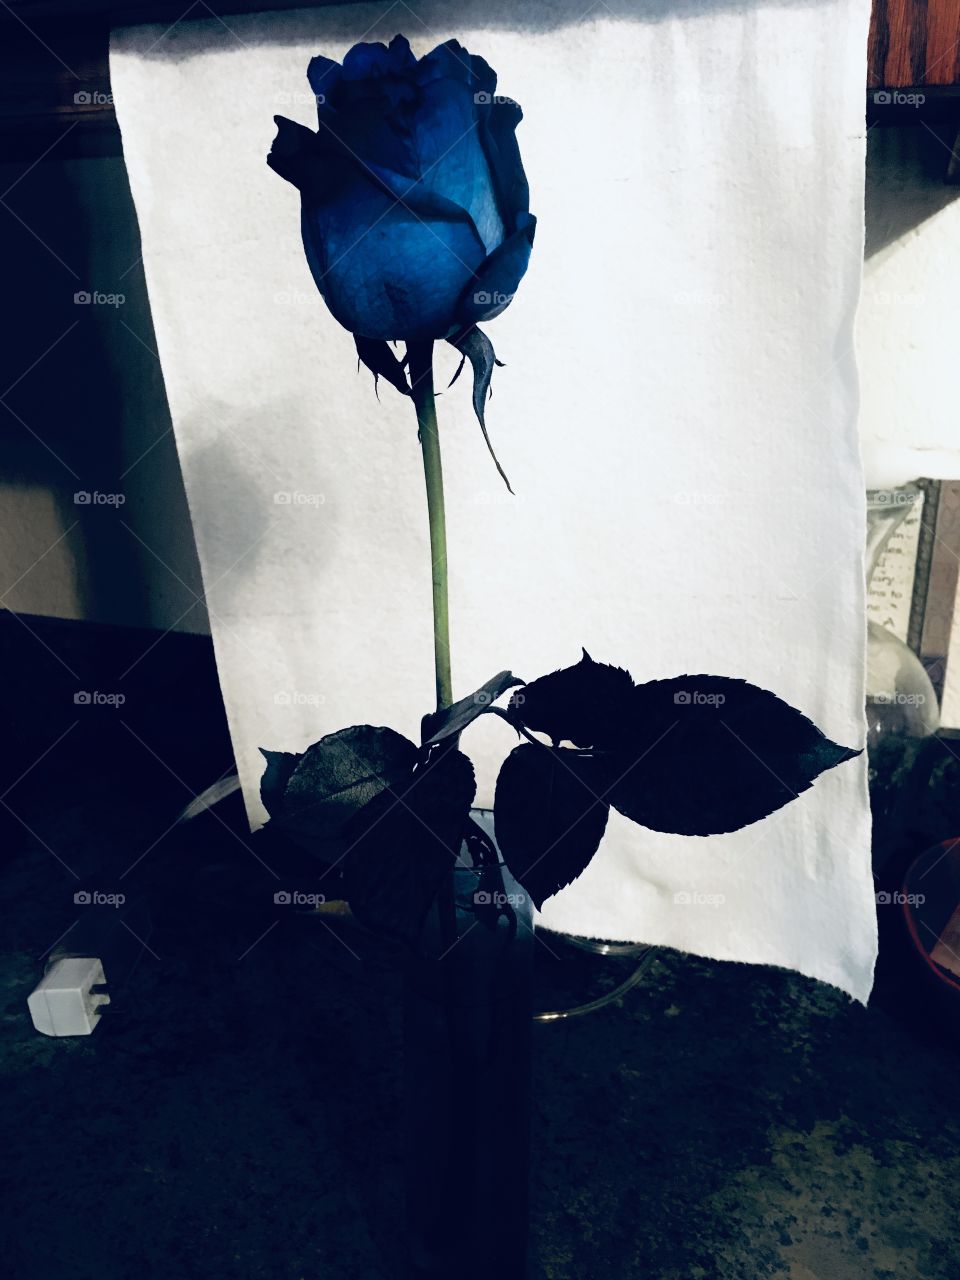 My beautiful blue rose sitting on the kitchen counter.darkened it up some playing with colors.